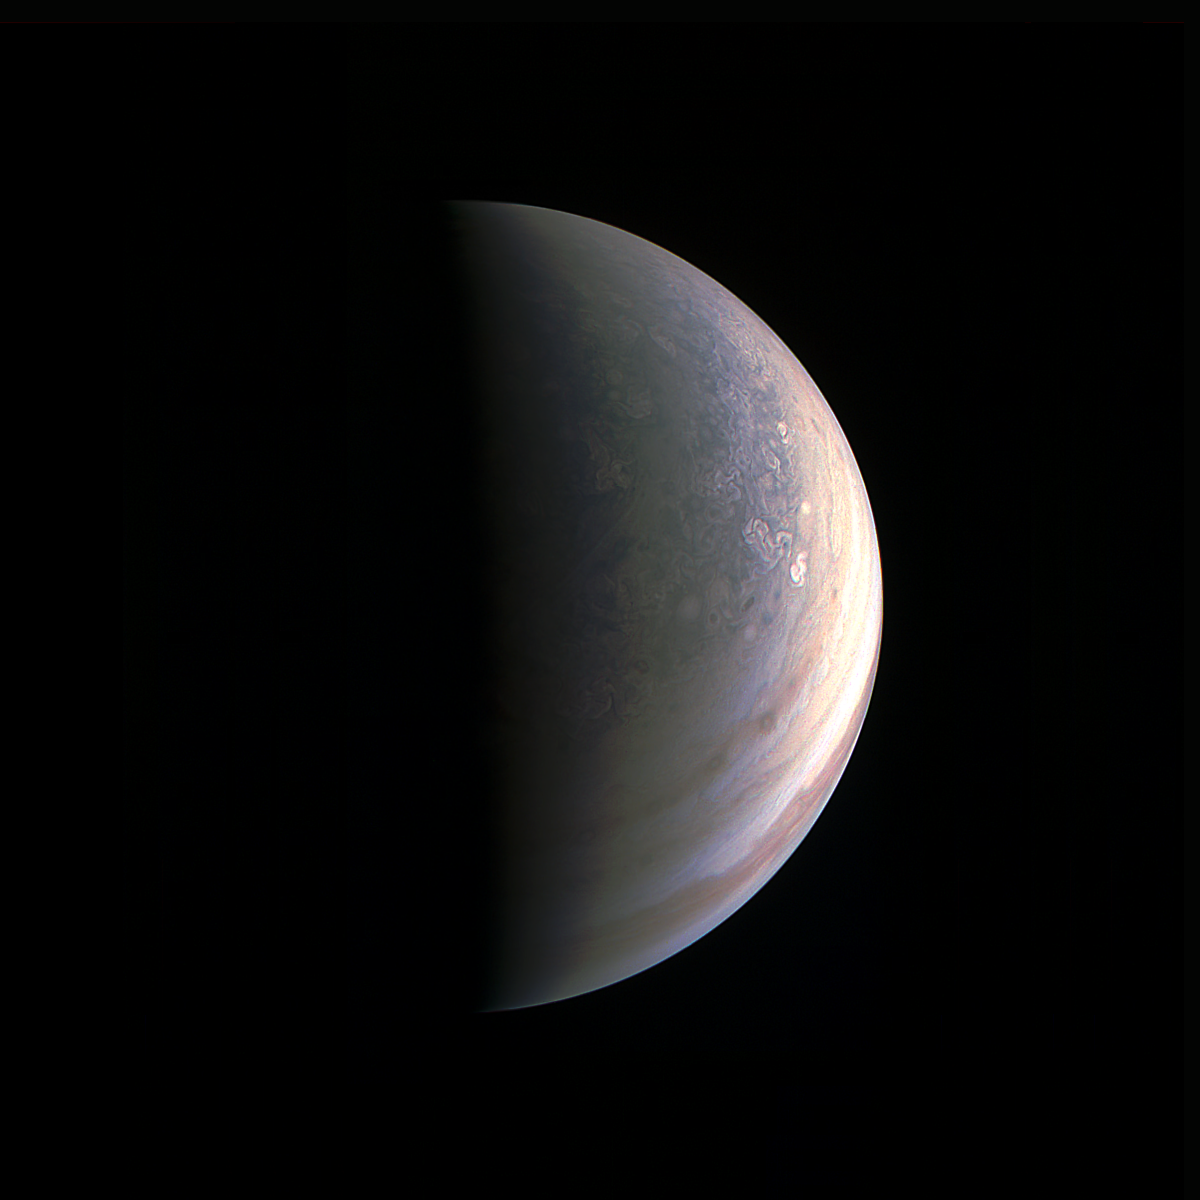 Jupiter Is ‘Hardly Recognisable’ In Juno’s Latest Images